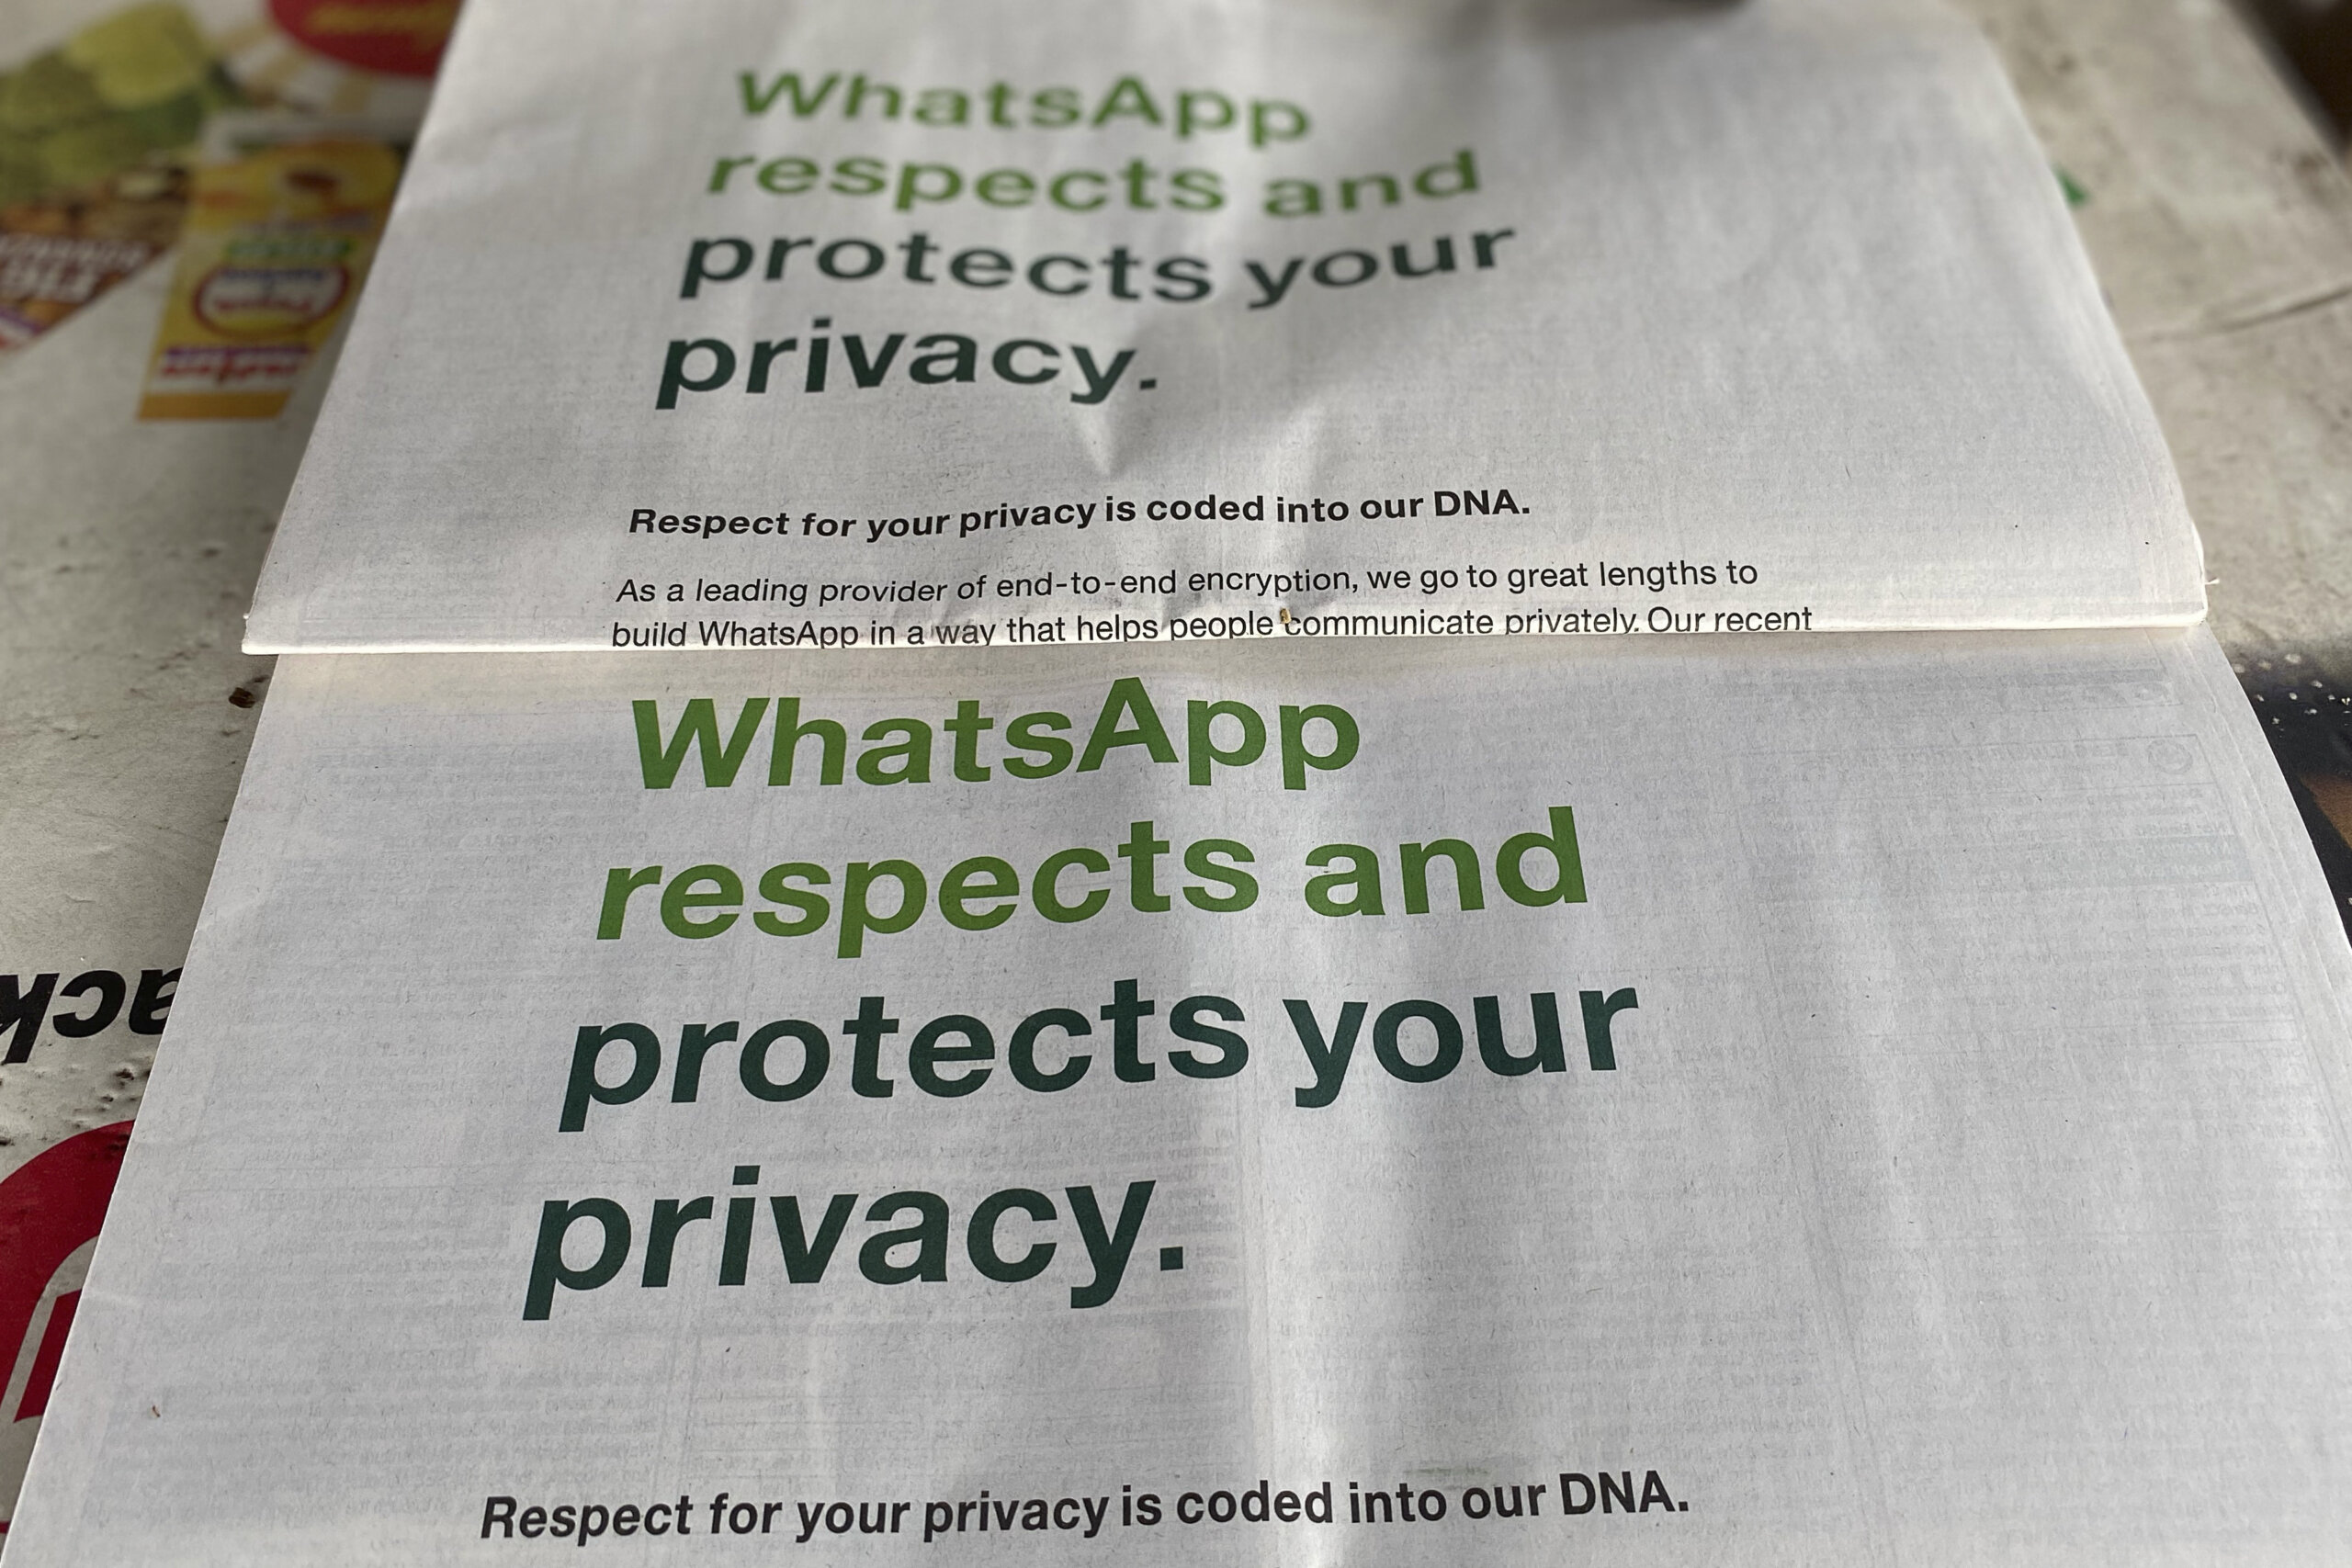 After a record GDPR fine, Whatsapp fine tuned its privacy policy in Europe